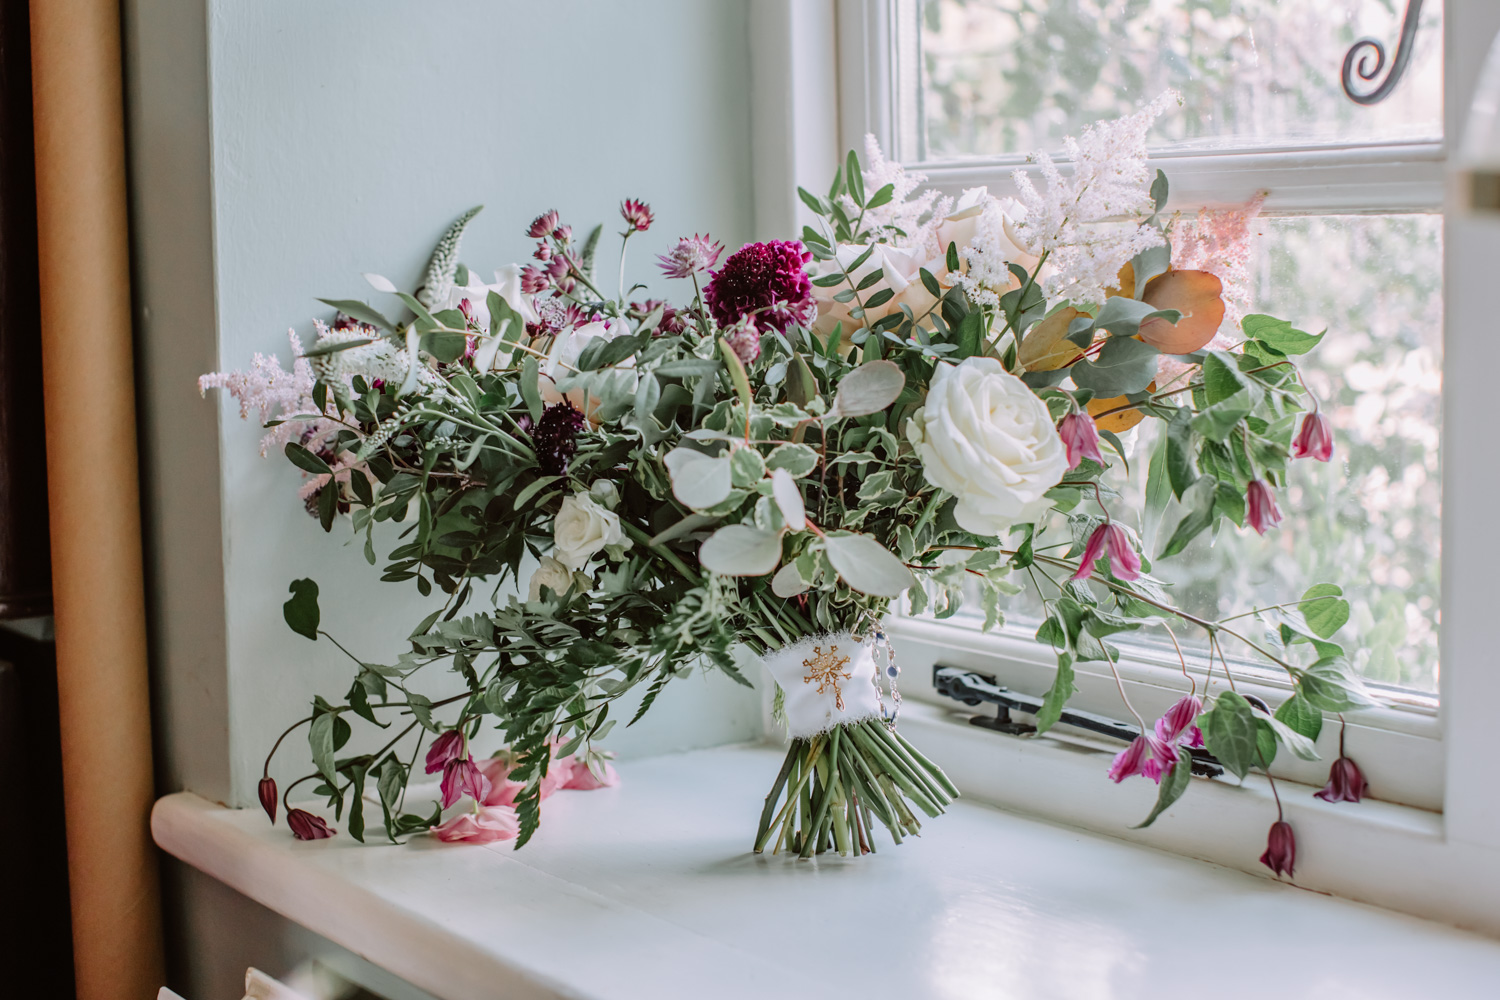 Bridal bouquet placed by the window